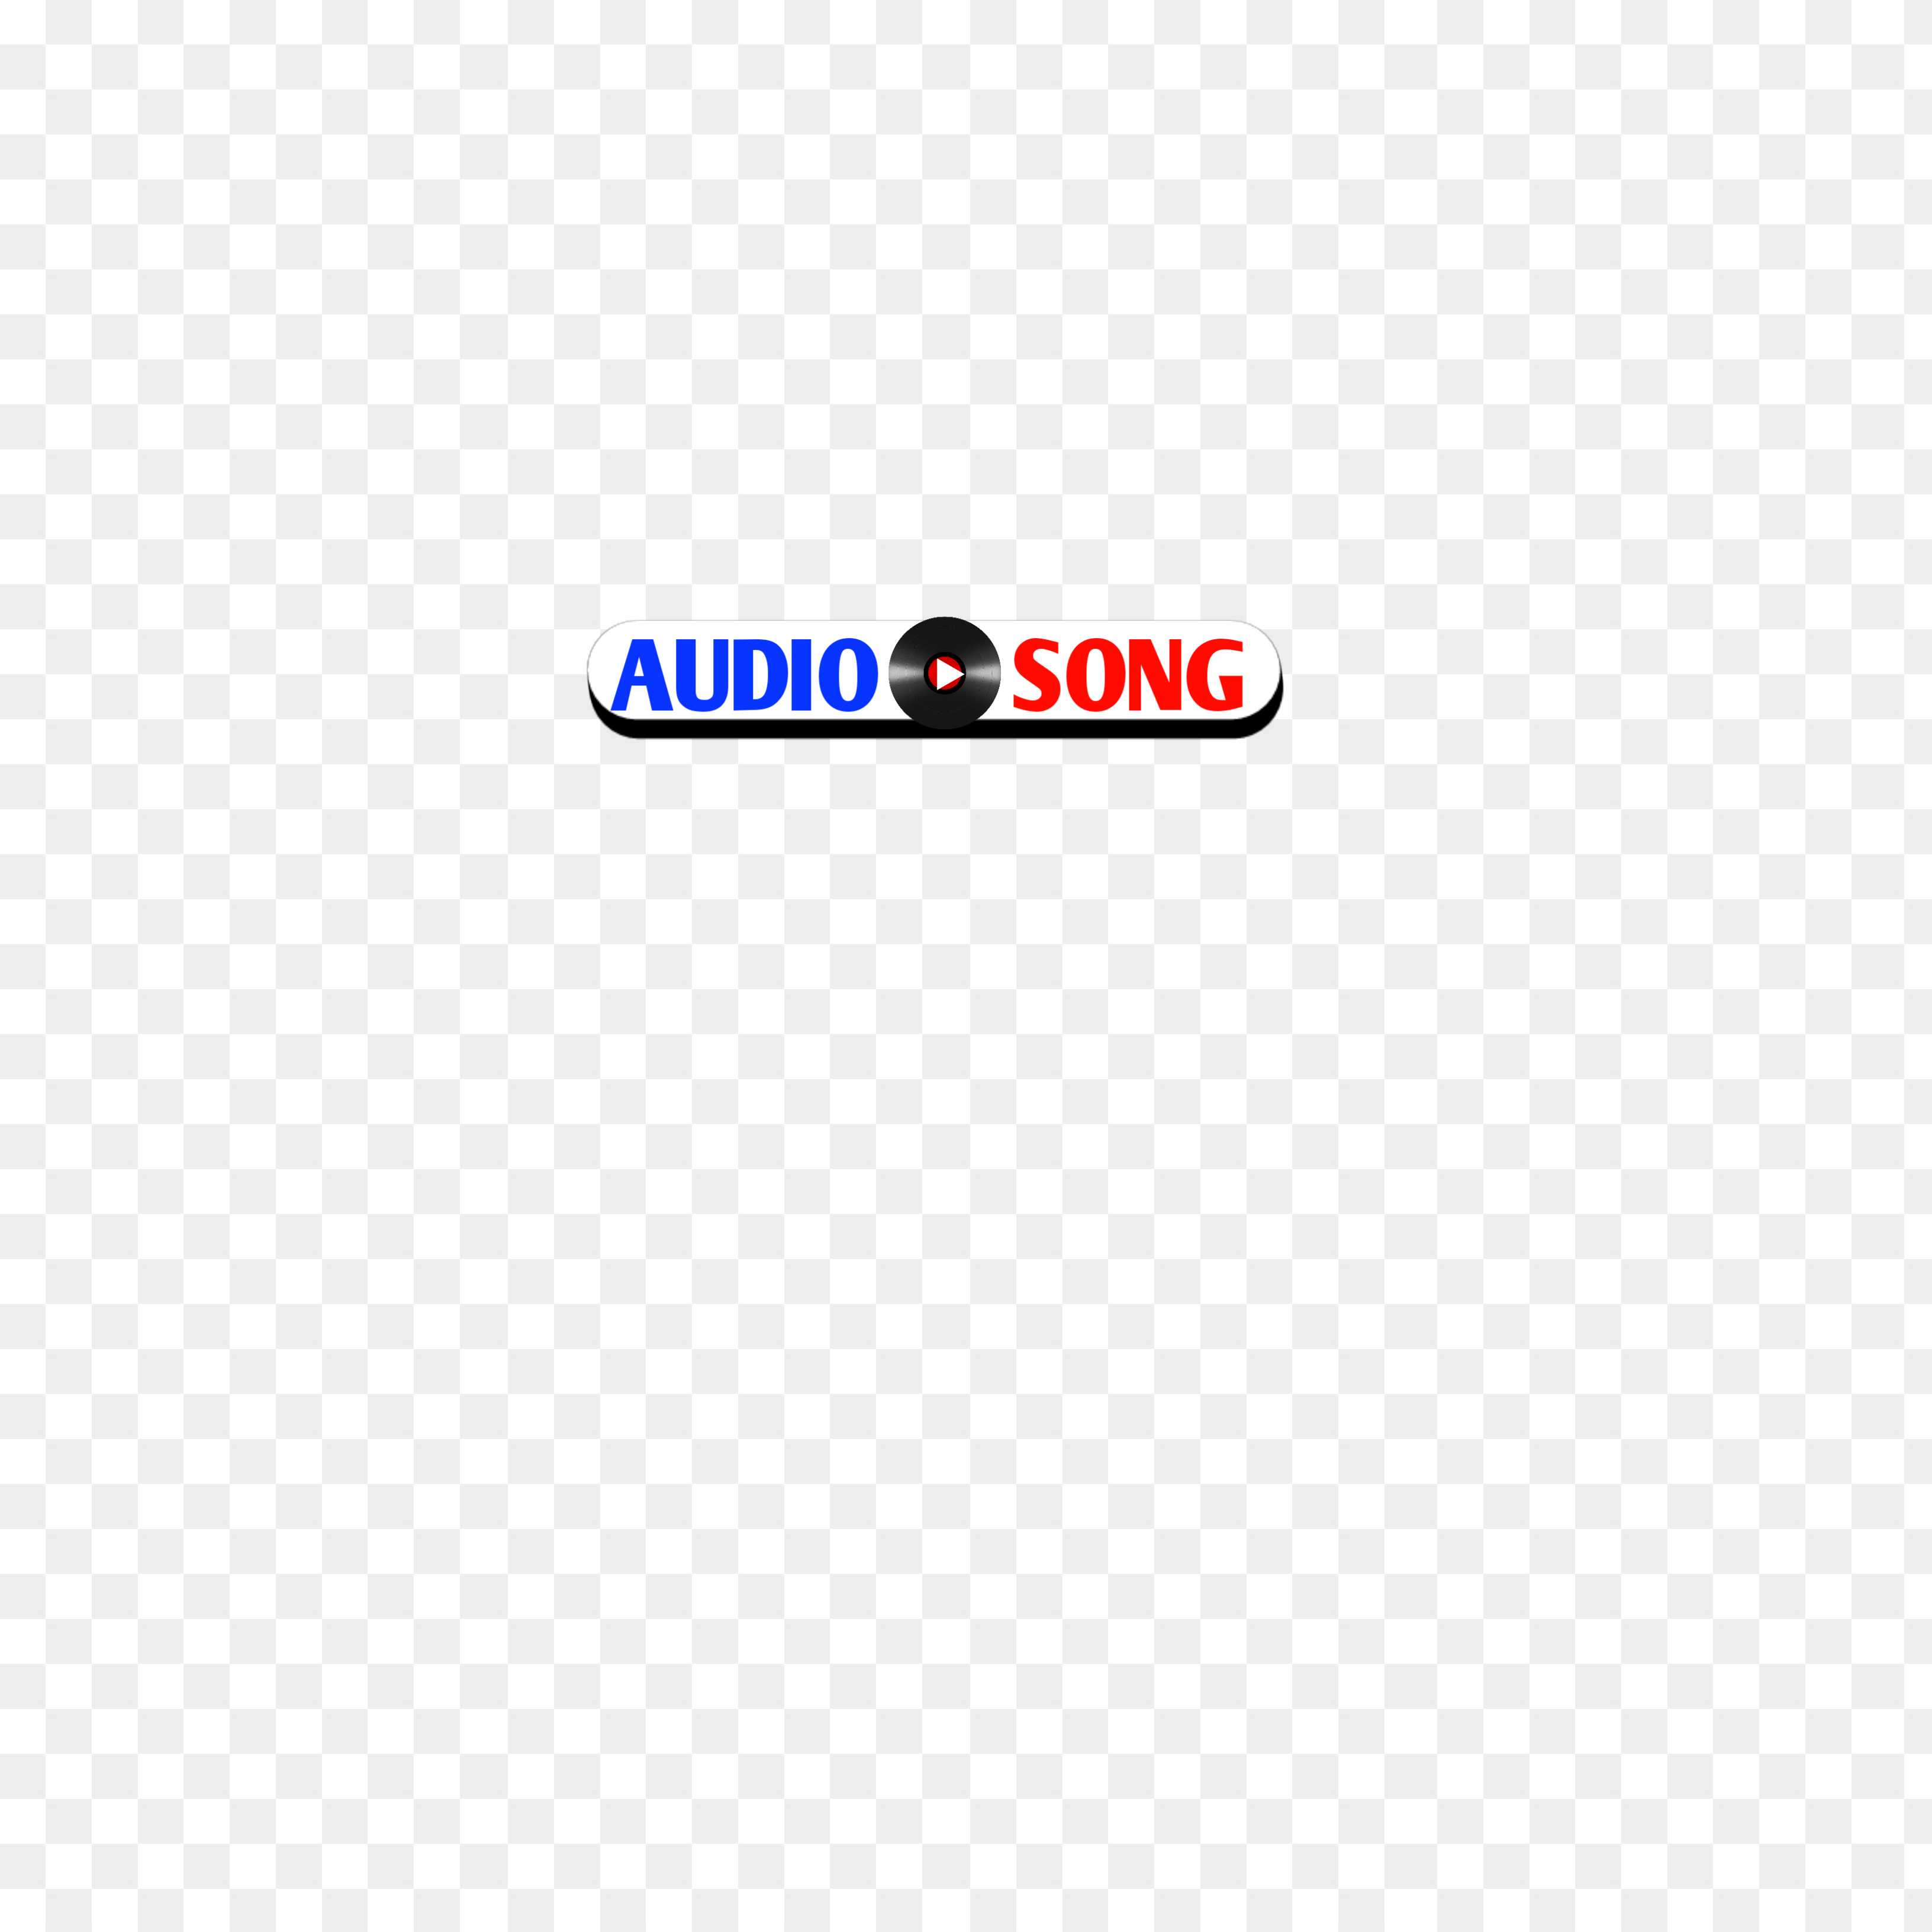 Audio song logo PNG download_ music poster png image